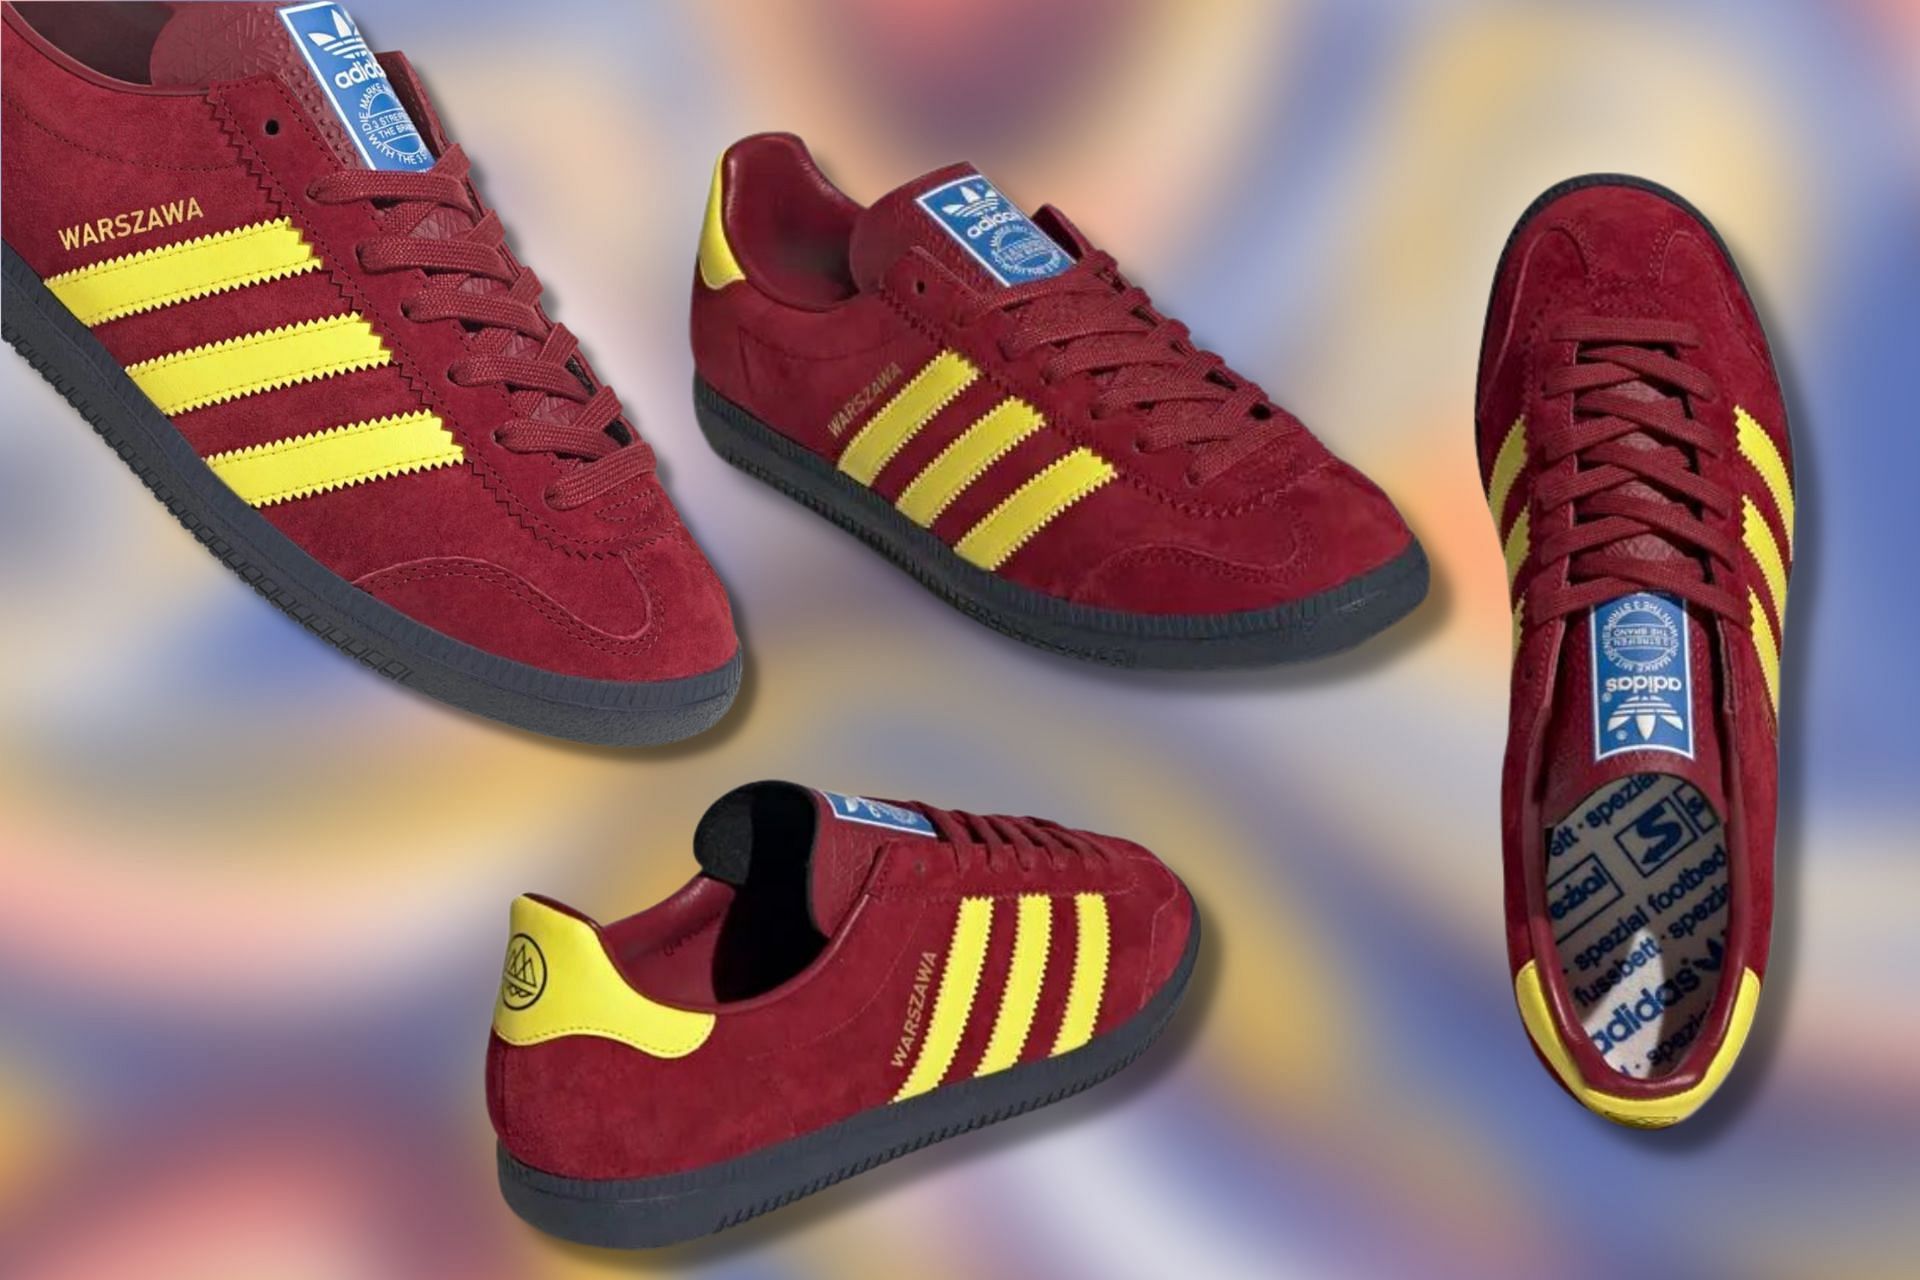 Where to buy Adidas SPZL Warszawa shoes? Price, release date, and more